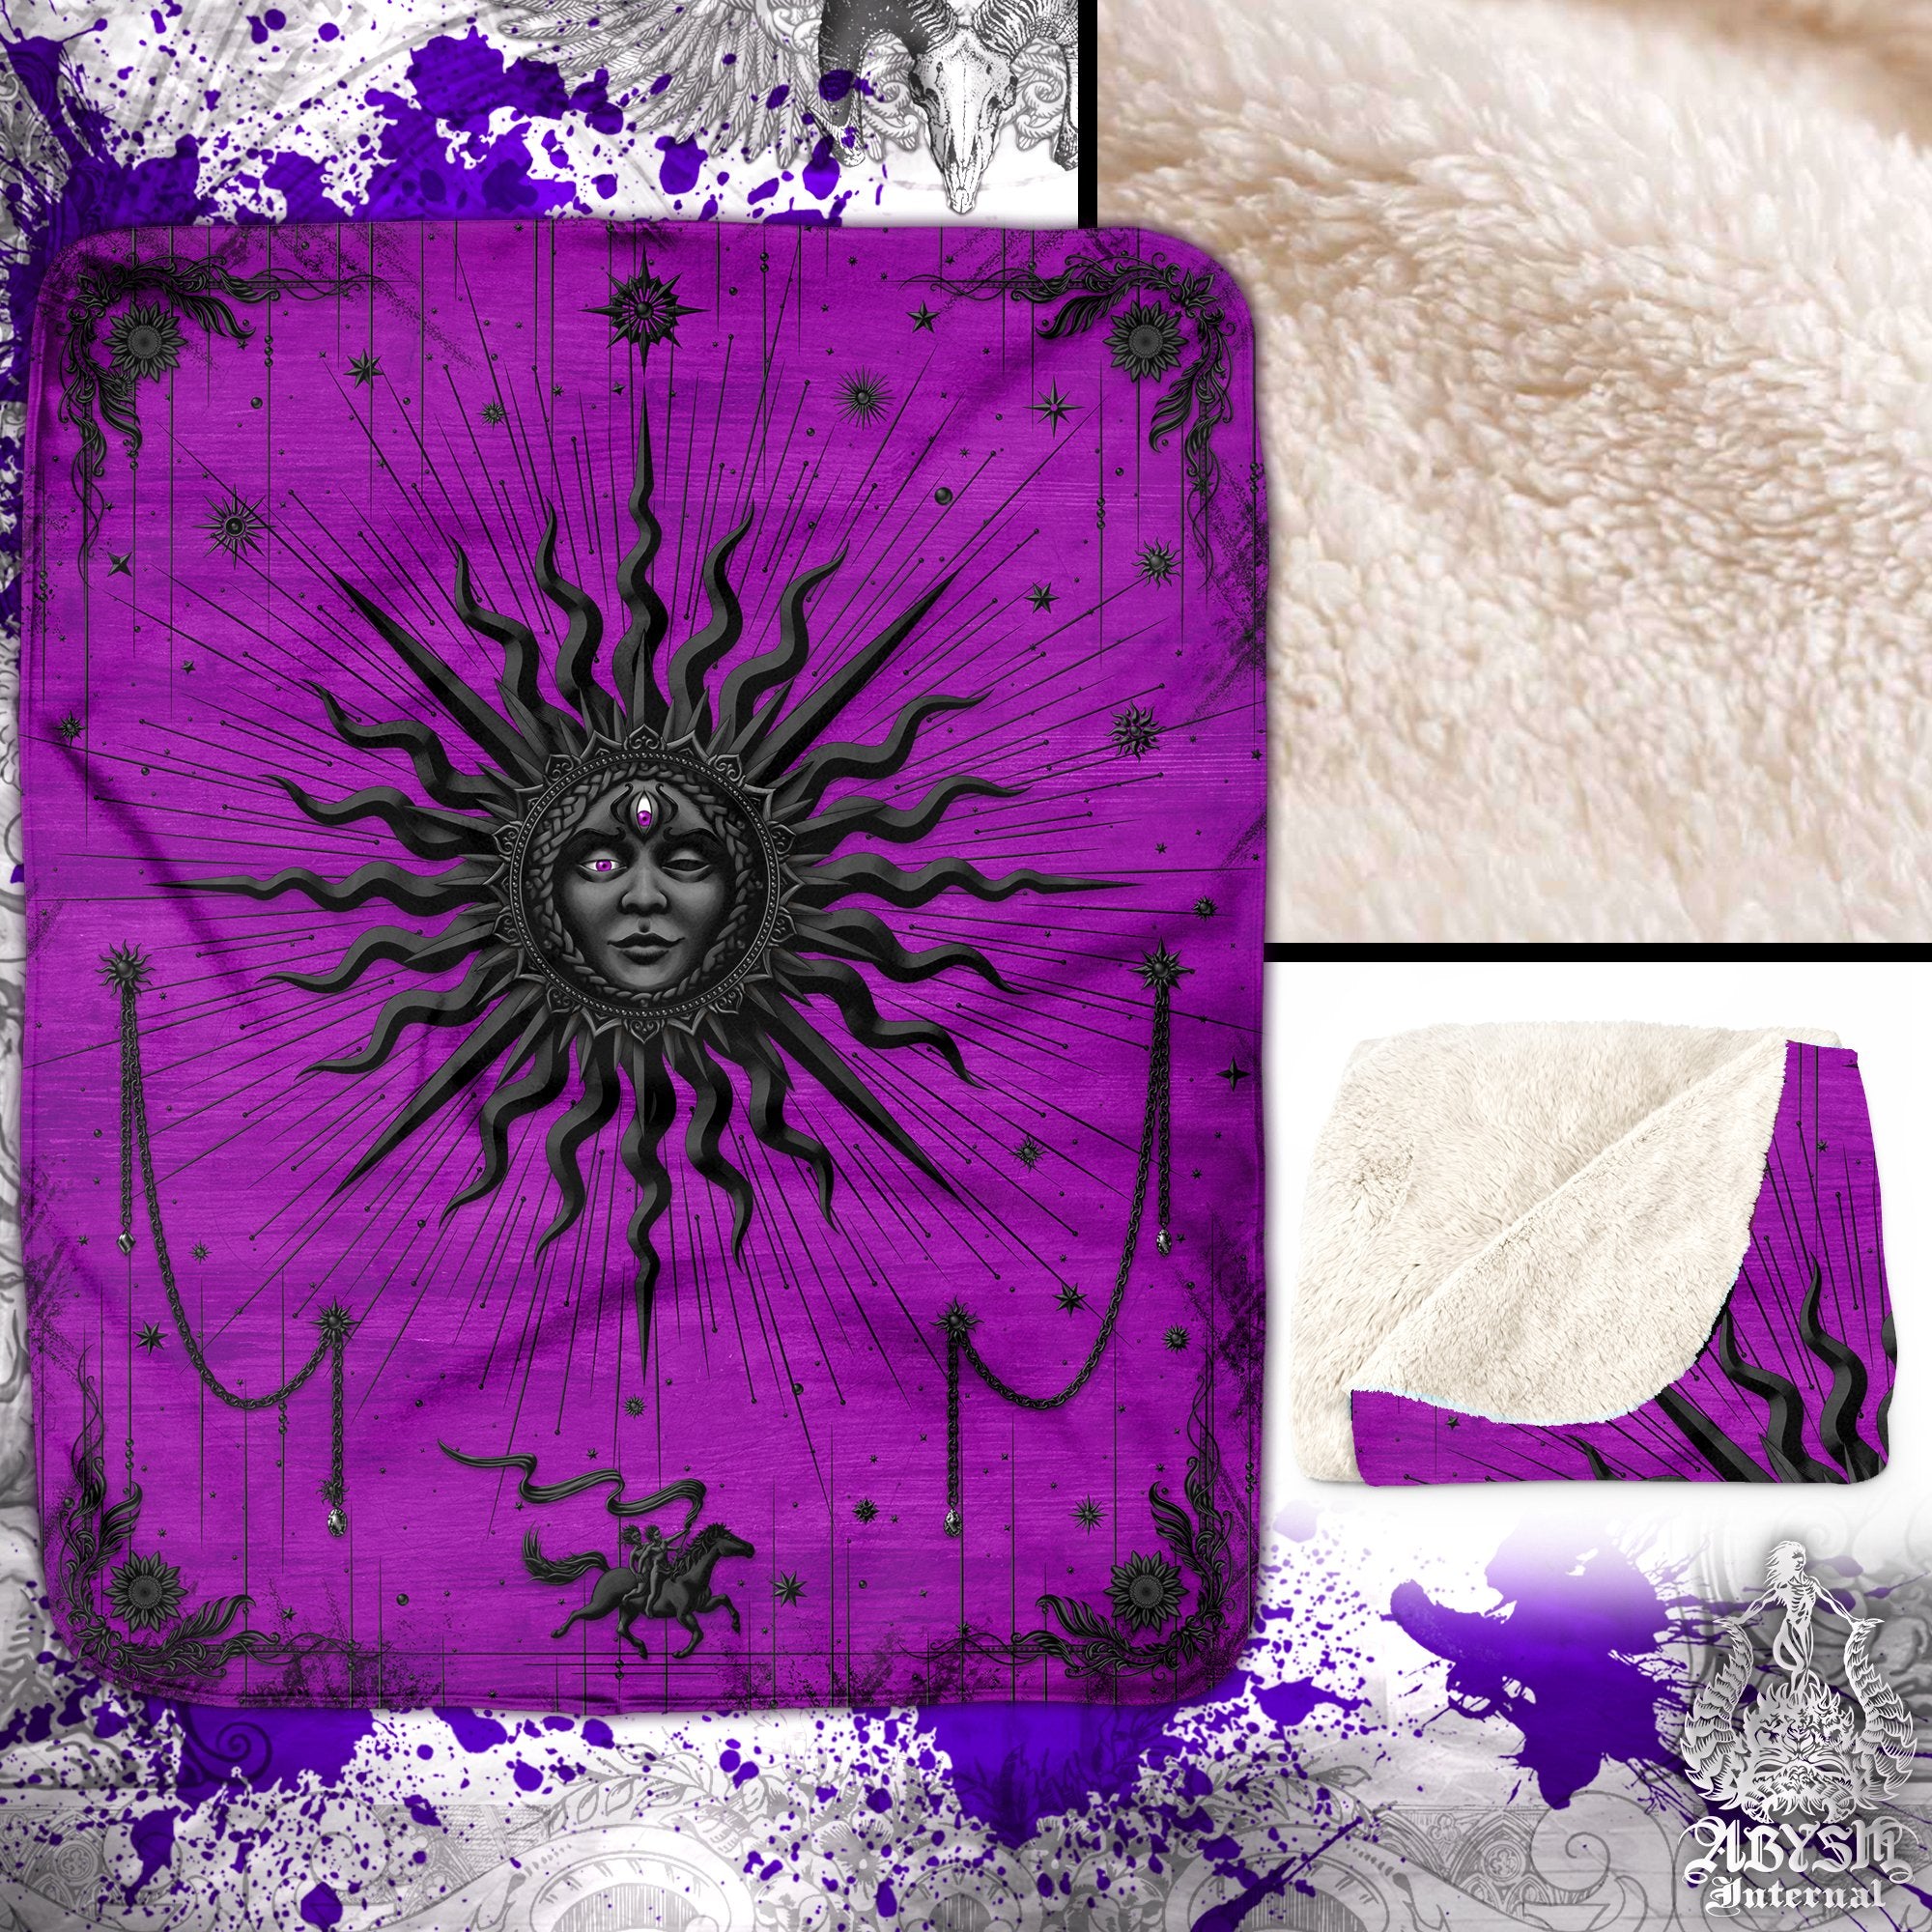 Witchy Sun Sherpa Fleece Throw Blanket, Pastel Goth Esoteric Room, Whimsigoth Tarot Arcana Art, Good Witch Home Decor, Fortune Gift - Black Purple - Abysm Internal